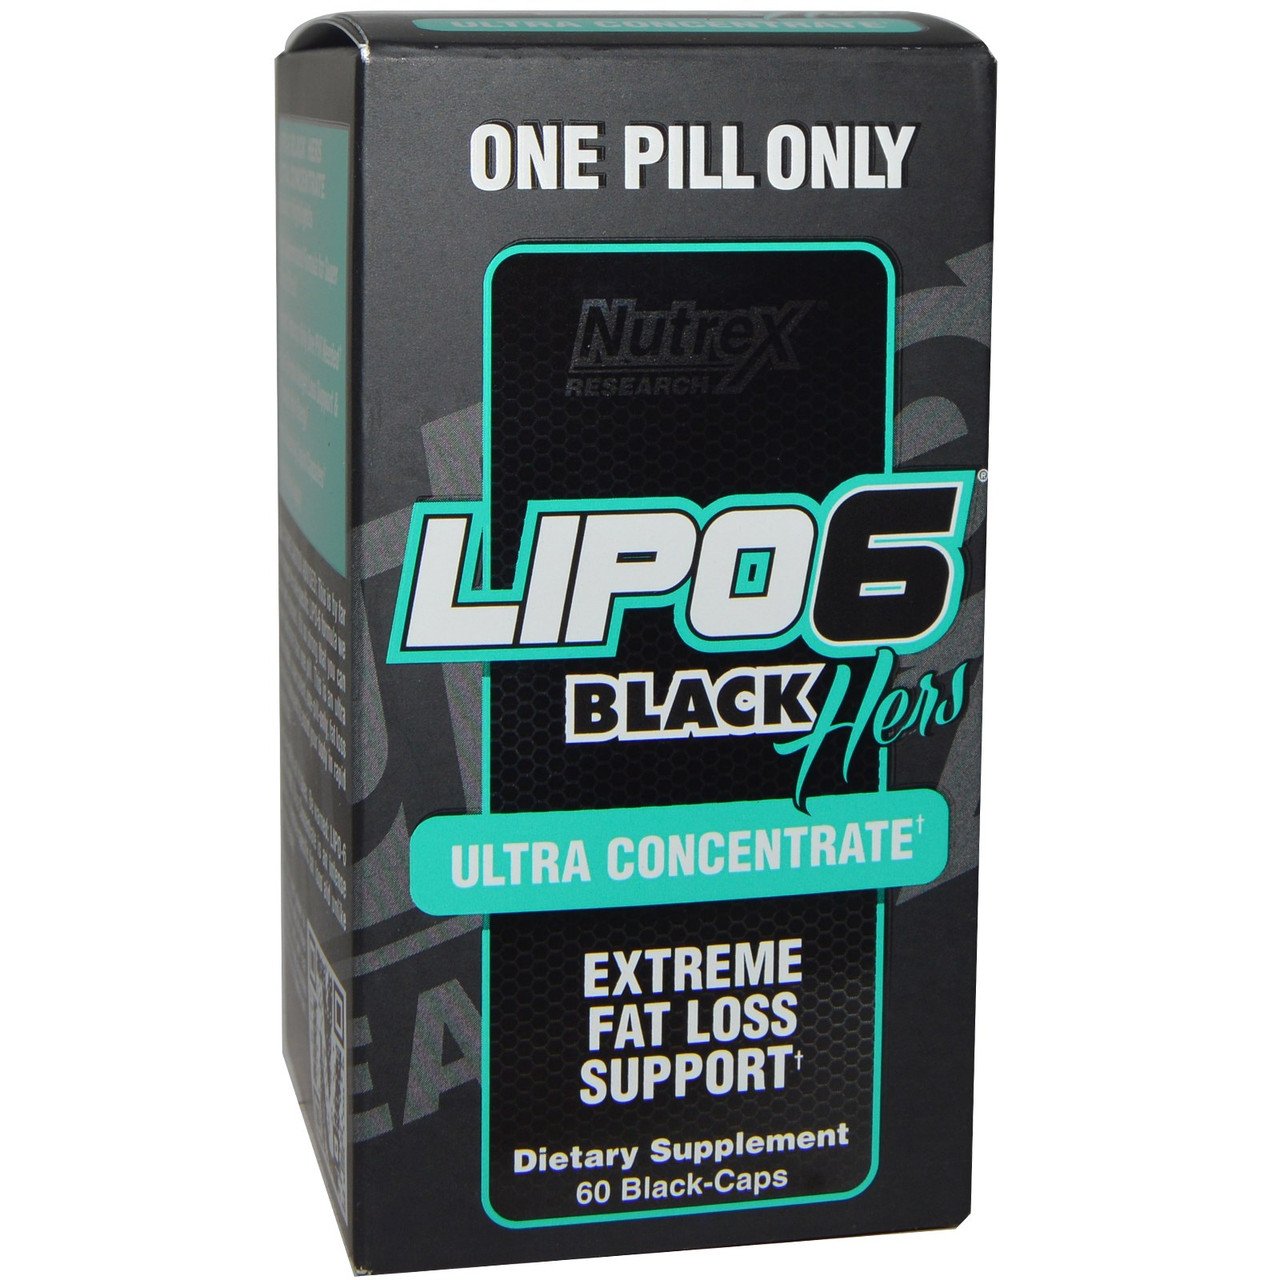 Lipo-6 Black Hers Ultra Concentrate Nutrex 60 Black-Caps ,  ml, Nutrex Research. Fat Burner. Weight Loss Fat burning 